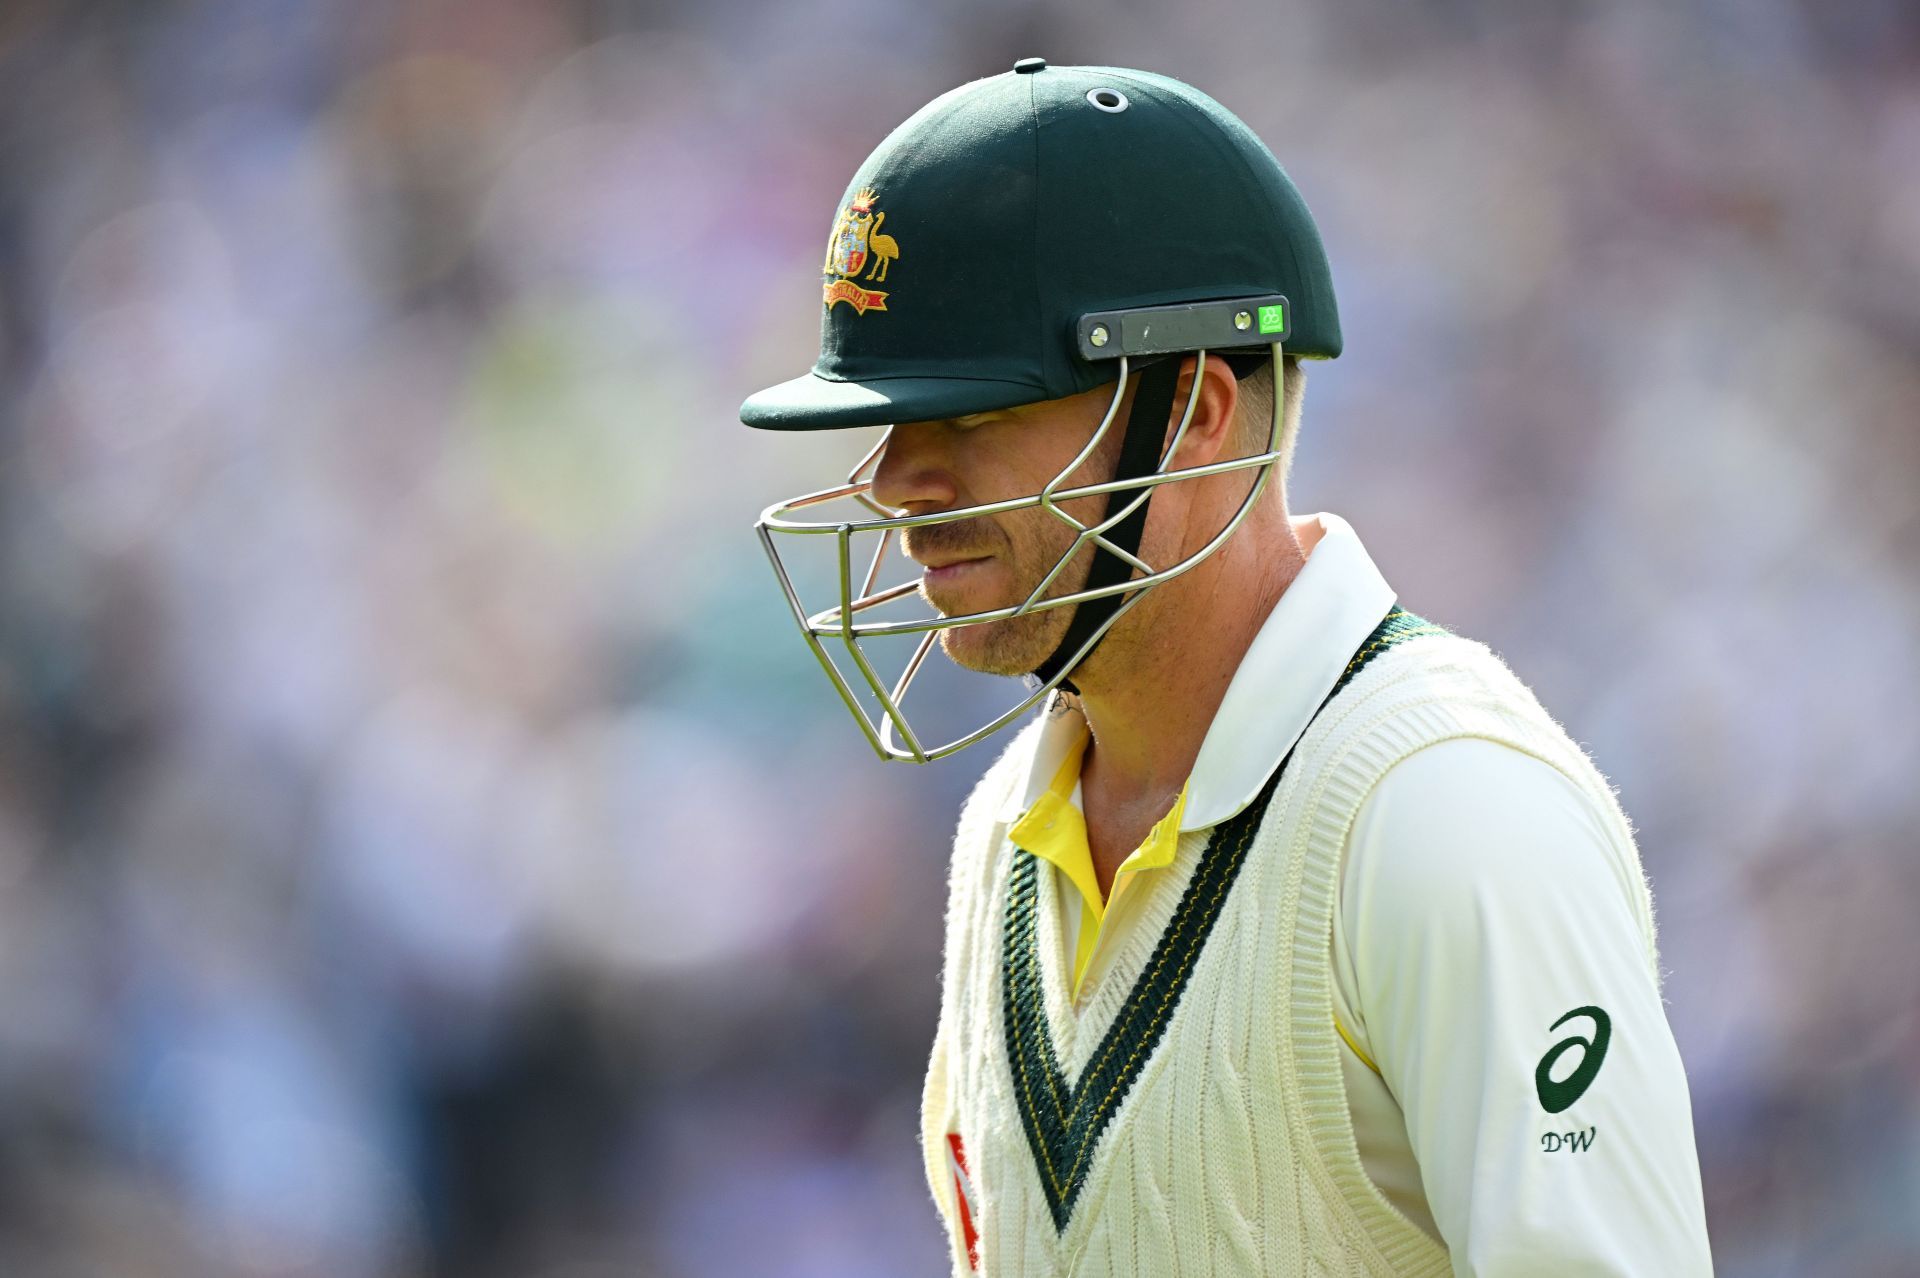 Warner is on extremely thin ice ahead of 5th Ashes Test